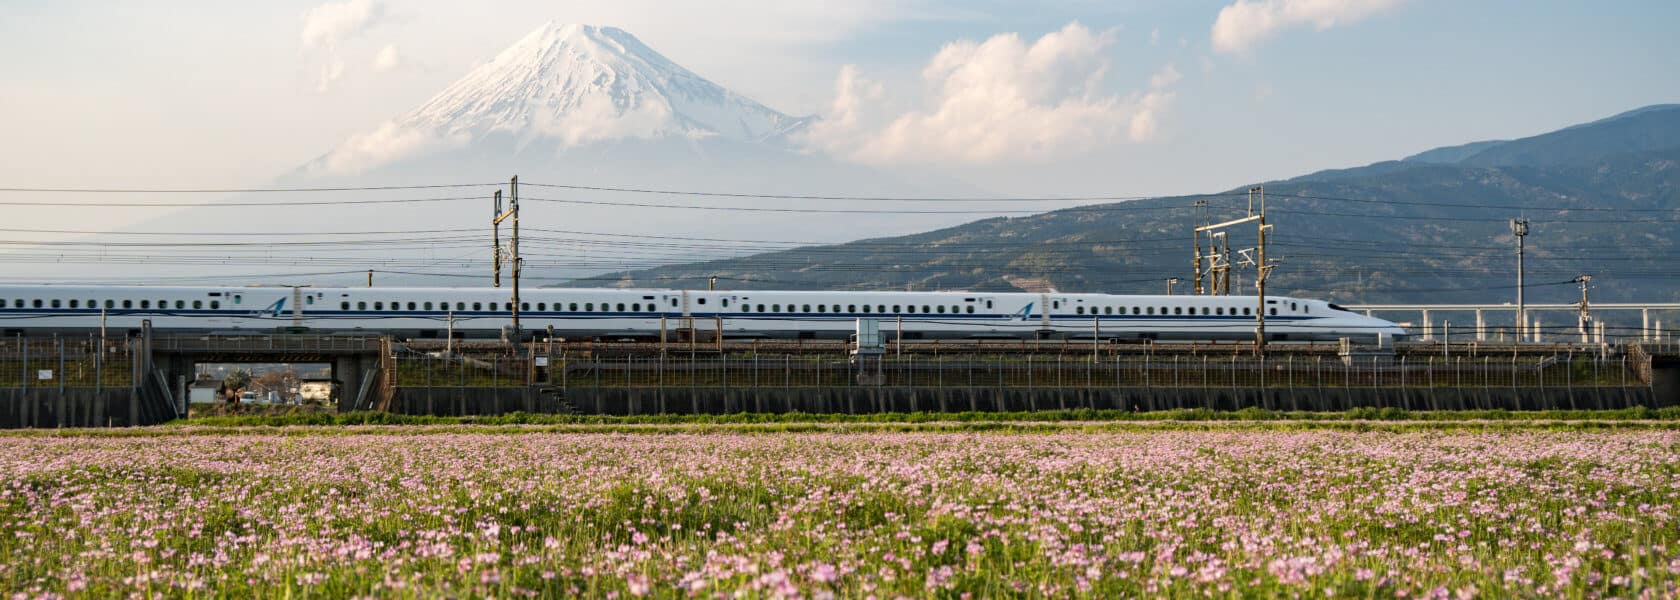 The Best Train Journeys In The World Part Two